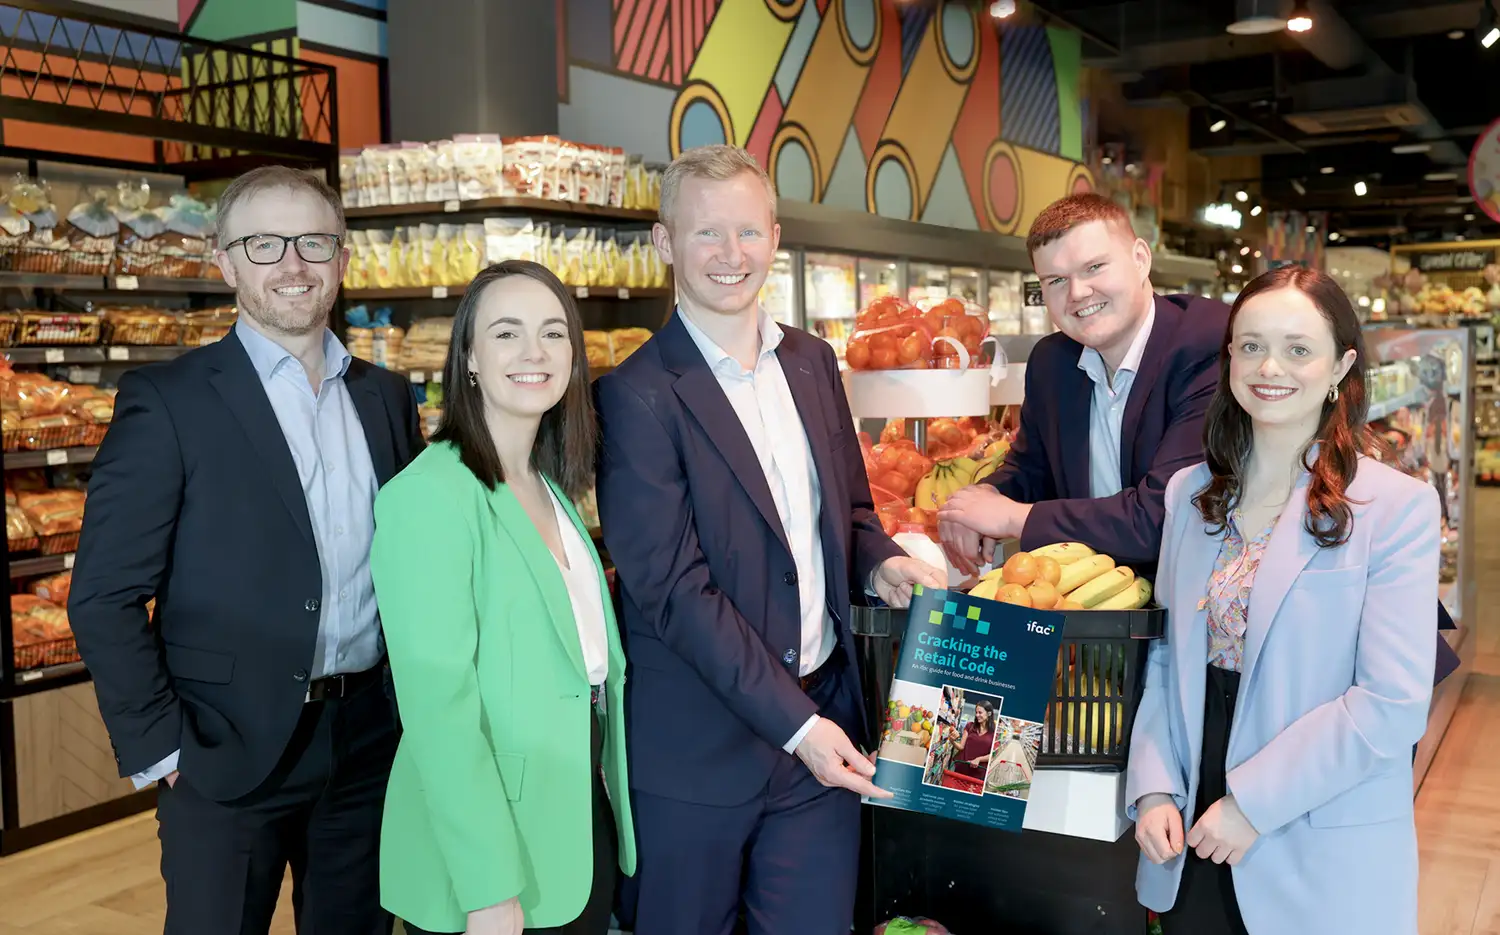 Ifac unveils its guide to retail for food and drink SMEs